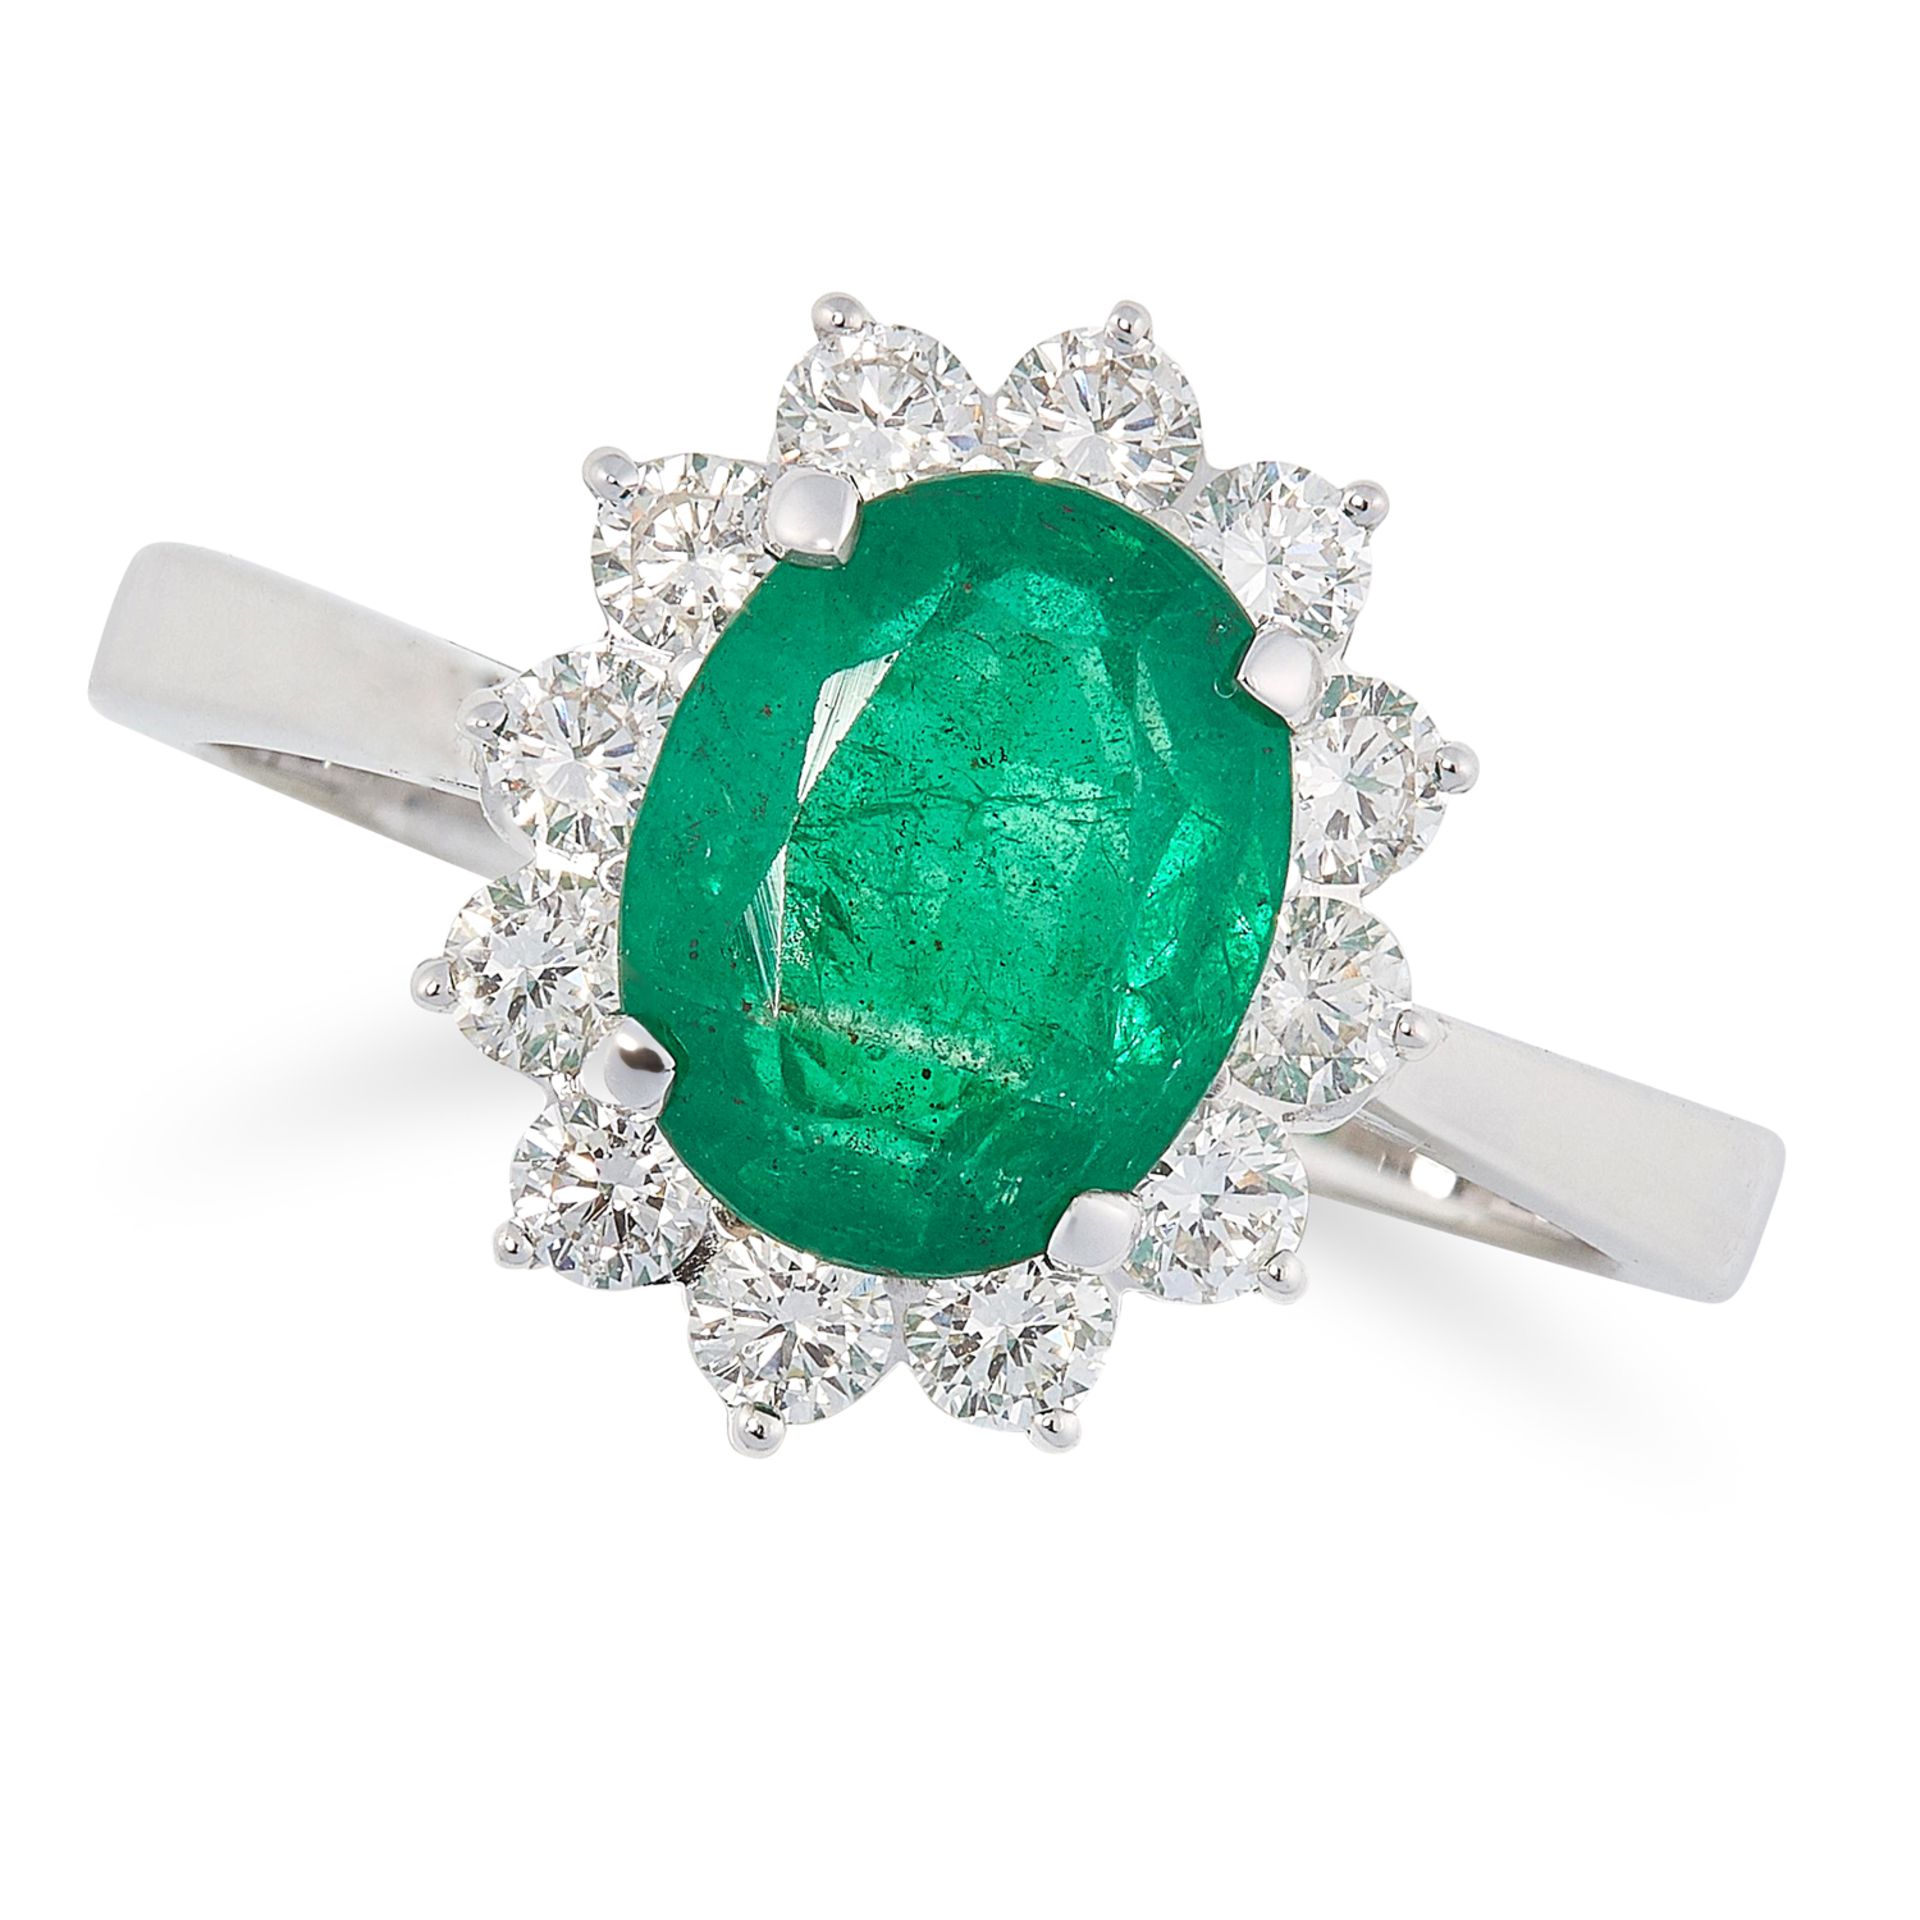 A 1.98 CARAT EMERALD AND DIAMOND CLUSTER RING in 18ct white gold, set with an oval cut emerald in